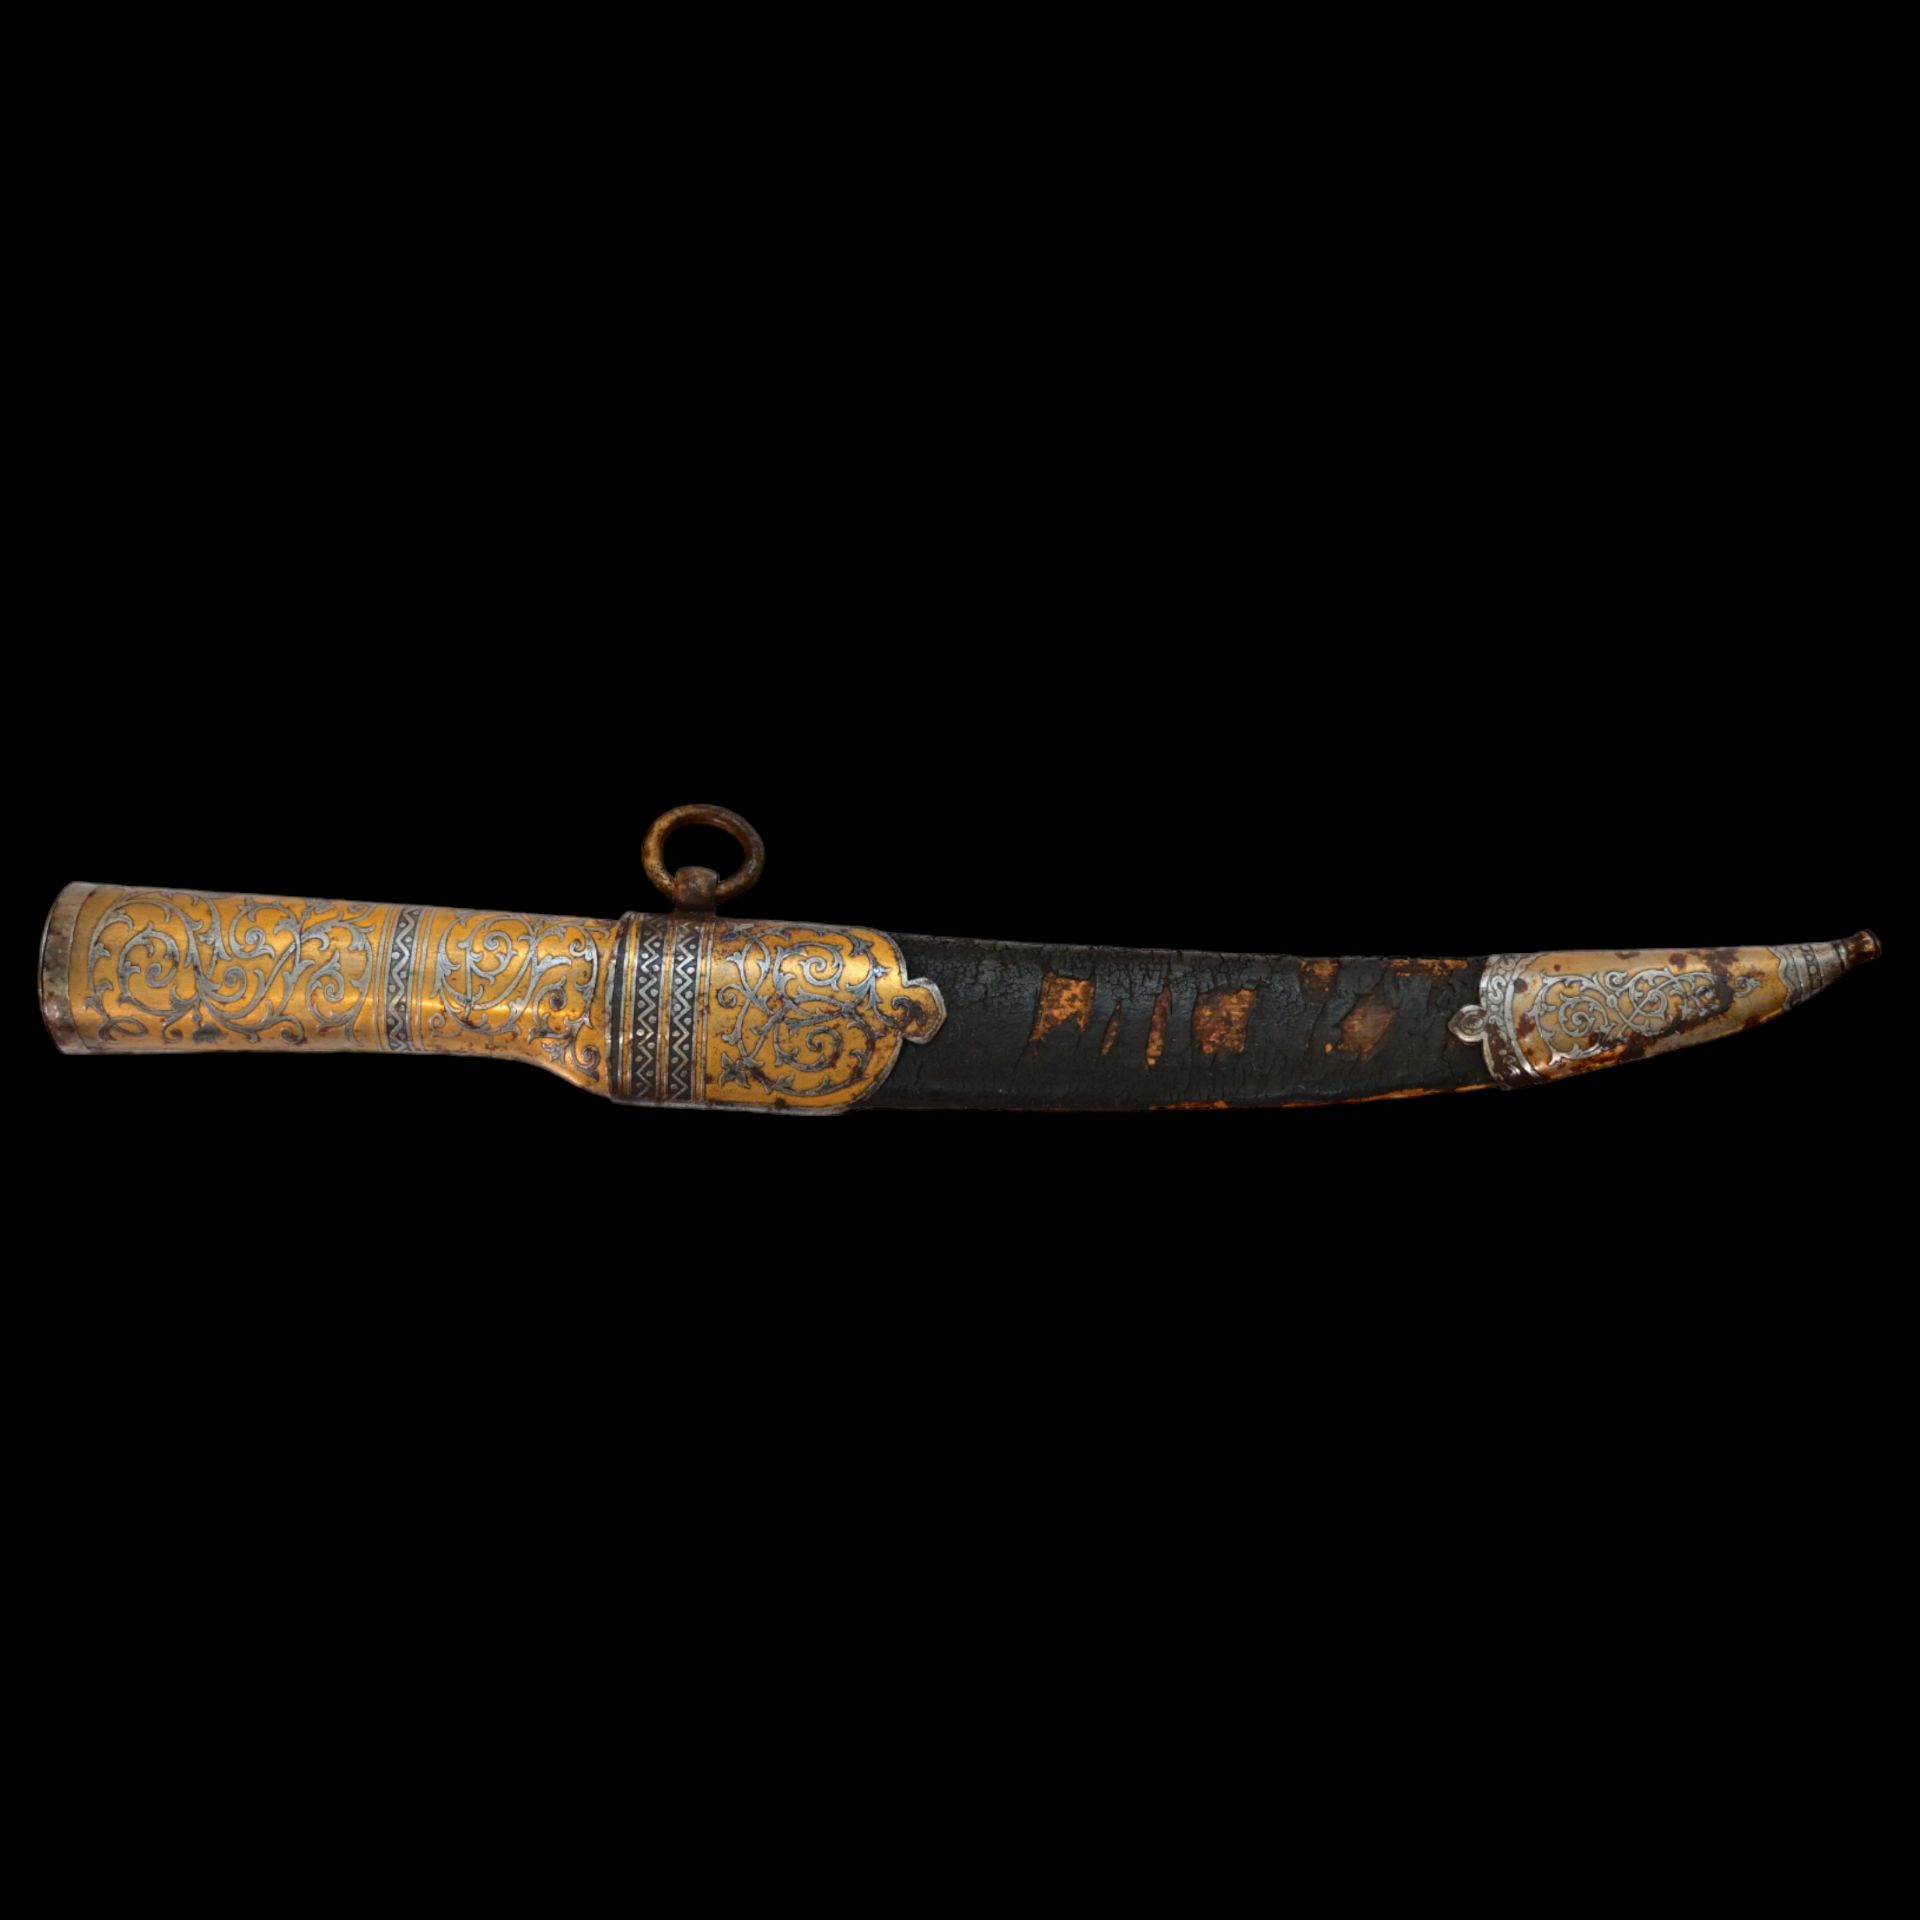 RARE HUNTING KNIFE, DECORATED WITH GOLD AND BLUE, RUSSIAN EMPIRE, ZLATOUST, 1889. - Image 2 of 26